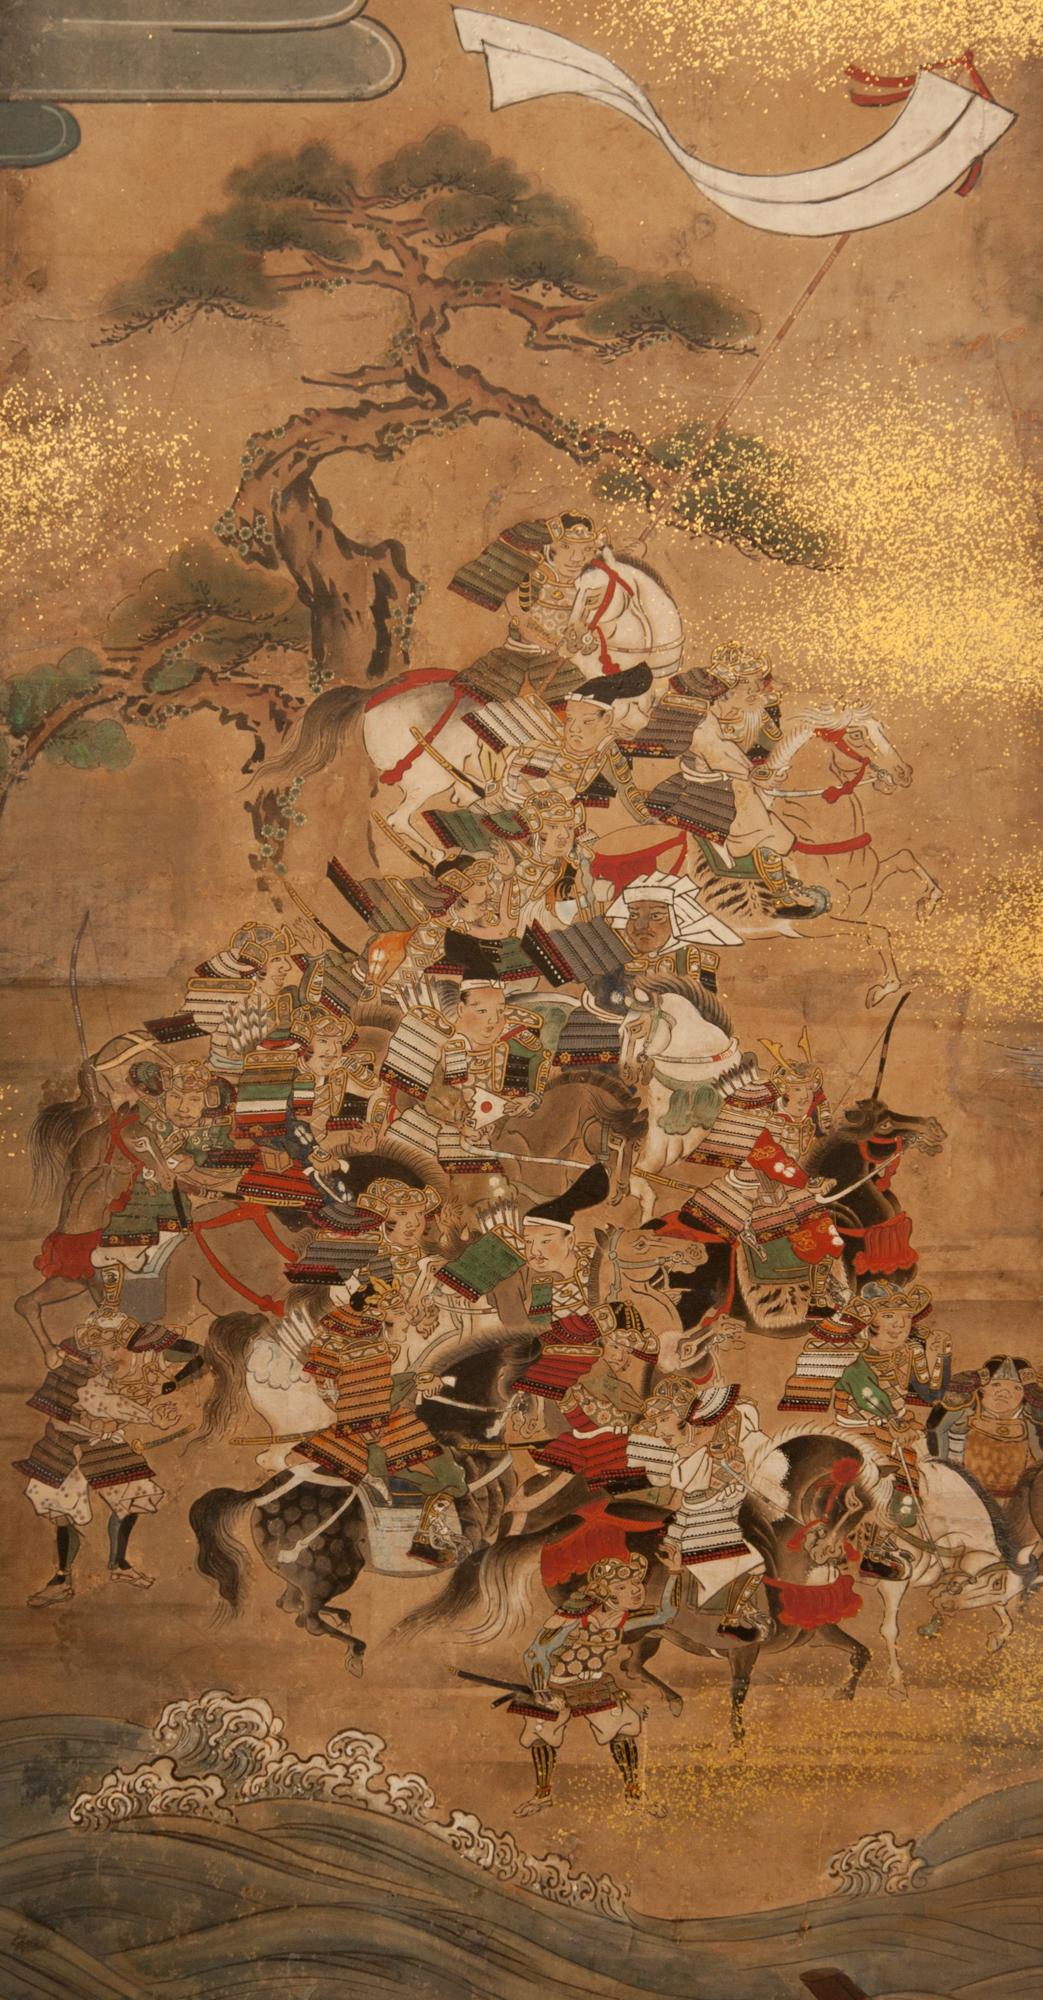 Yamato-e painting depicting a great land and sea battle, the Battle of Yashima, March 22, 1185. The Heike were flushed from the mountainous and protected area in Dazaifu, across the narrow sea to Yashima, (modern day Takamatsu). General Yoshitsune